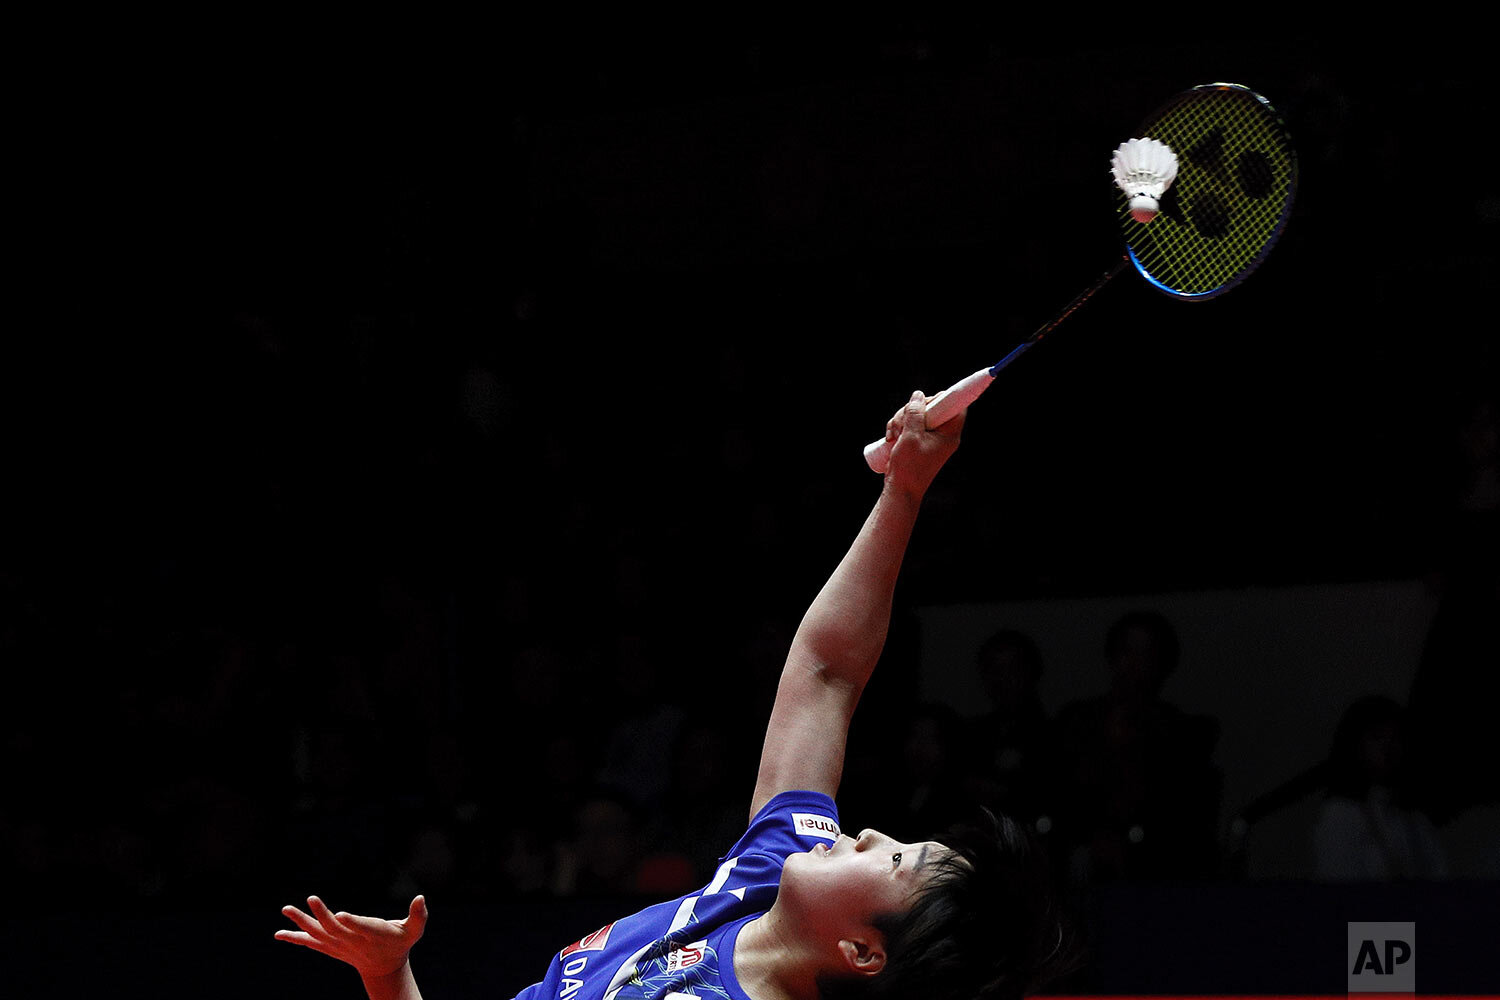  Japan's Akane Yamaguchi hits a return shot against China's Chen Yu Fei during their women's singles badminton semifinal match at the World Tour Finals in Guangzhou in south China's Guangdong province, Saturday, Dec. 14, 2019. (AP Photo/Andy Wong) 